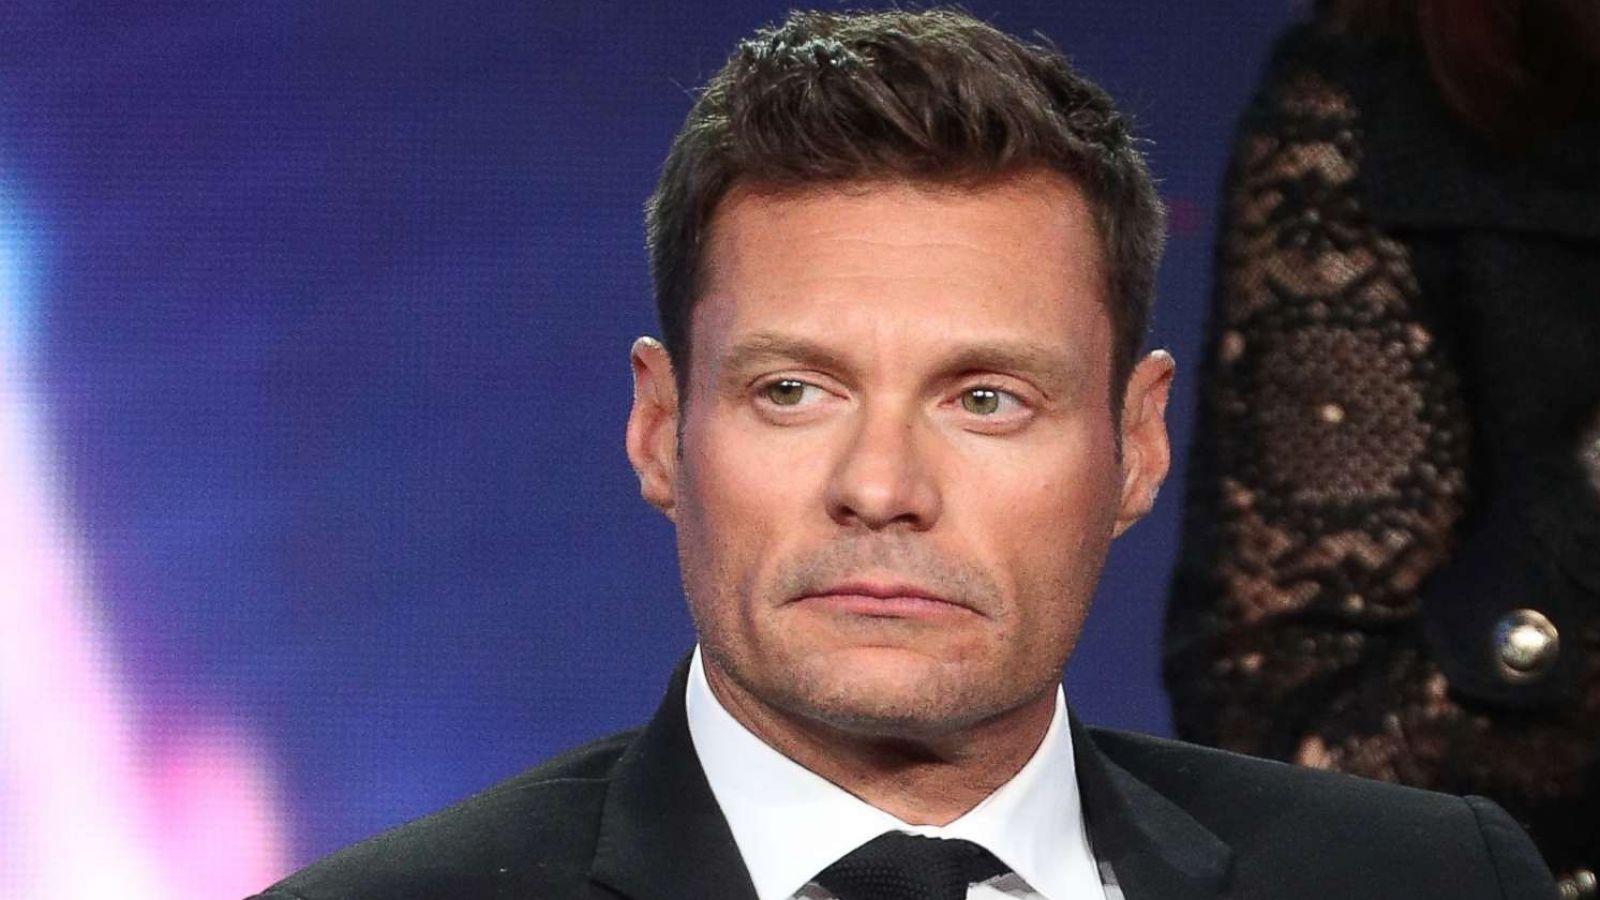 Ryan Seacrest responds to being 'wrongly accused of harassment